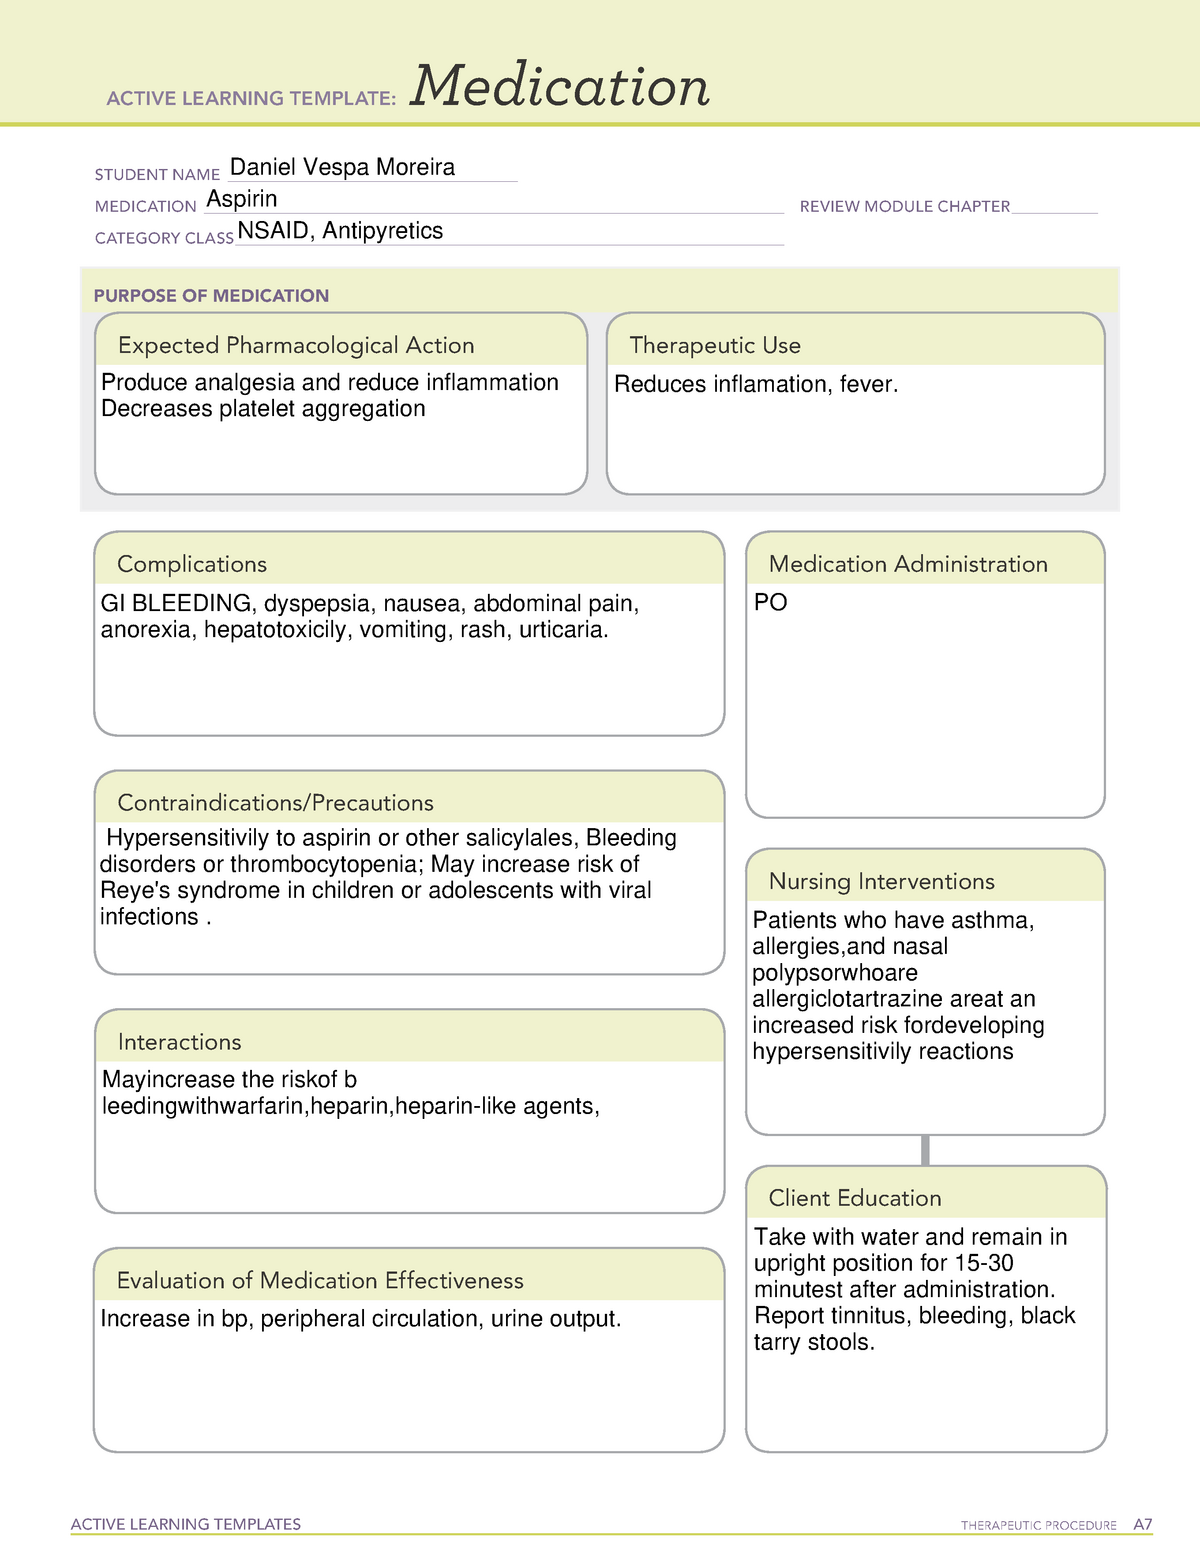 Aspirin Active Learning Template ACTIVE LEARNING TEMPLATES